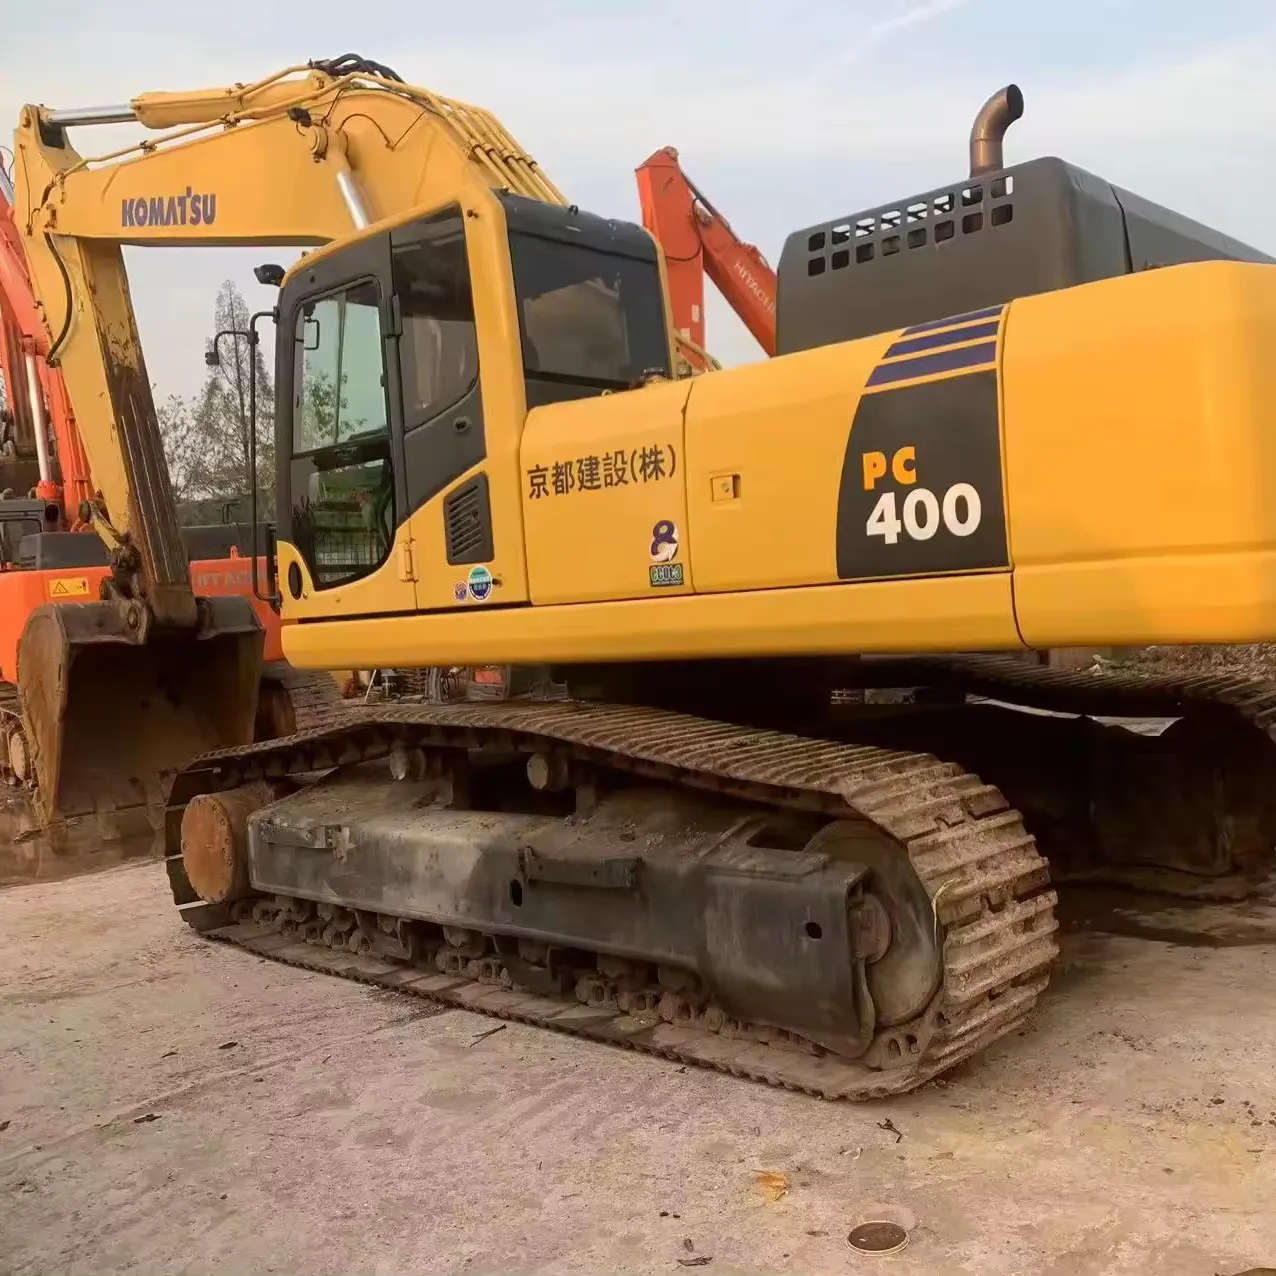 Used Komatsu400-8R In Good Condition Japan Import Excavator For Sale